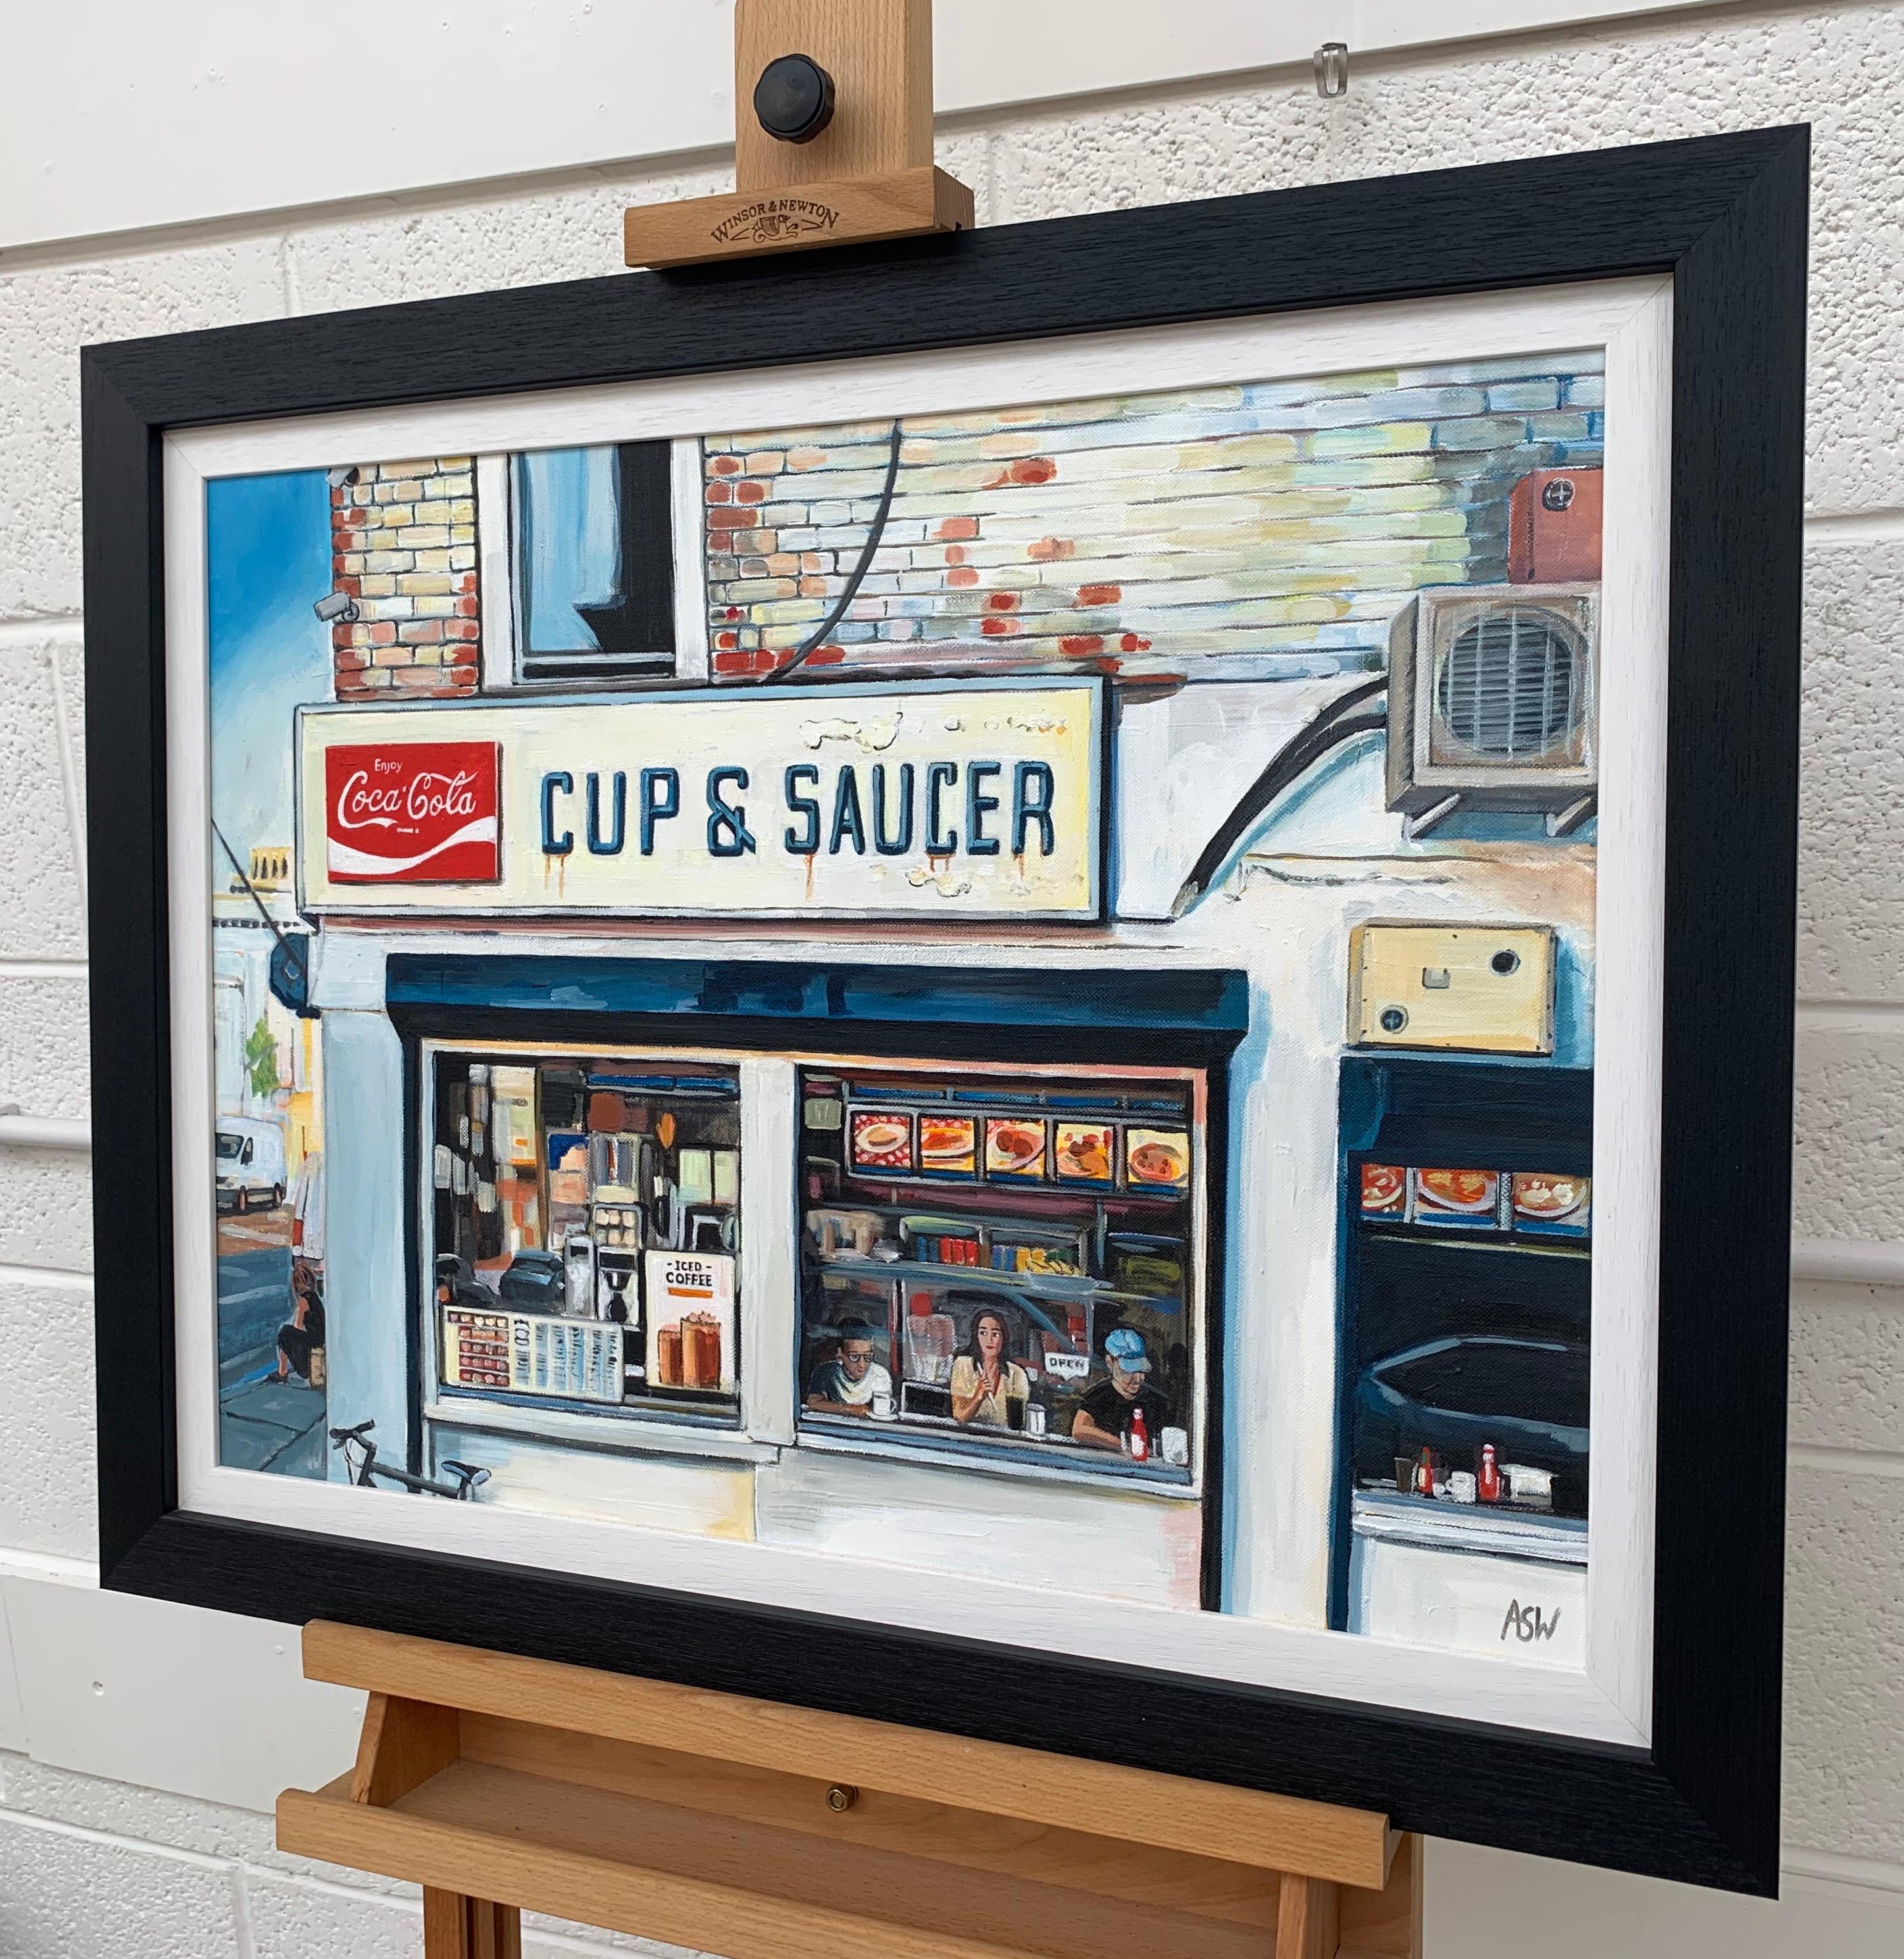 Original Painting of Cup & Saucer American Diner New York City by Leading British Urban Landscape Artist, Angela Wakefield.

Angela Wakefield has twice been on the front cover of ‘Art of England’ and featured in ARTnews, attracting international